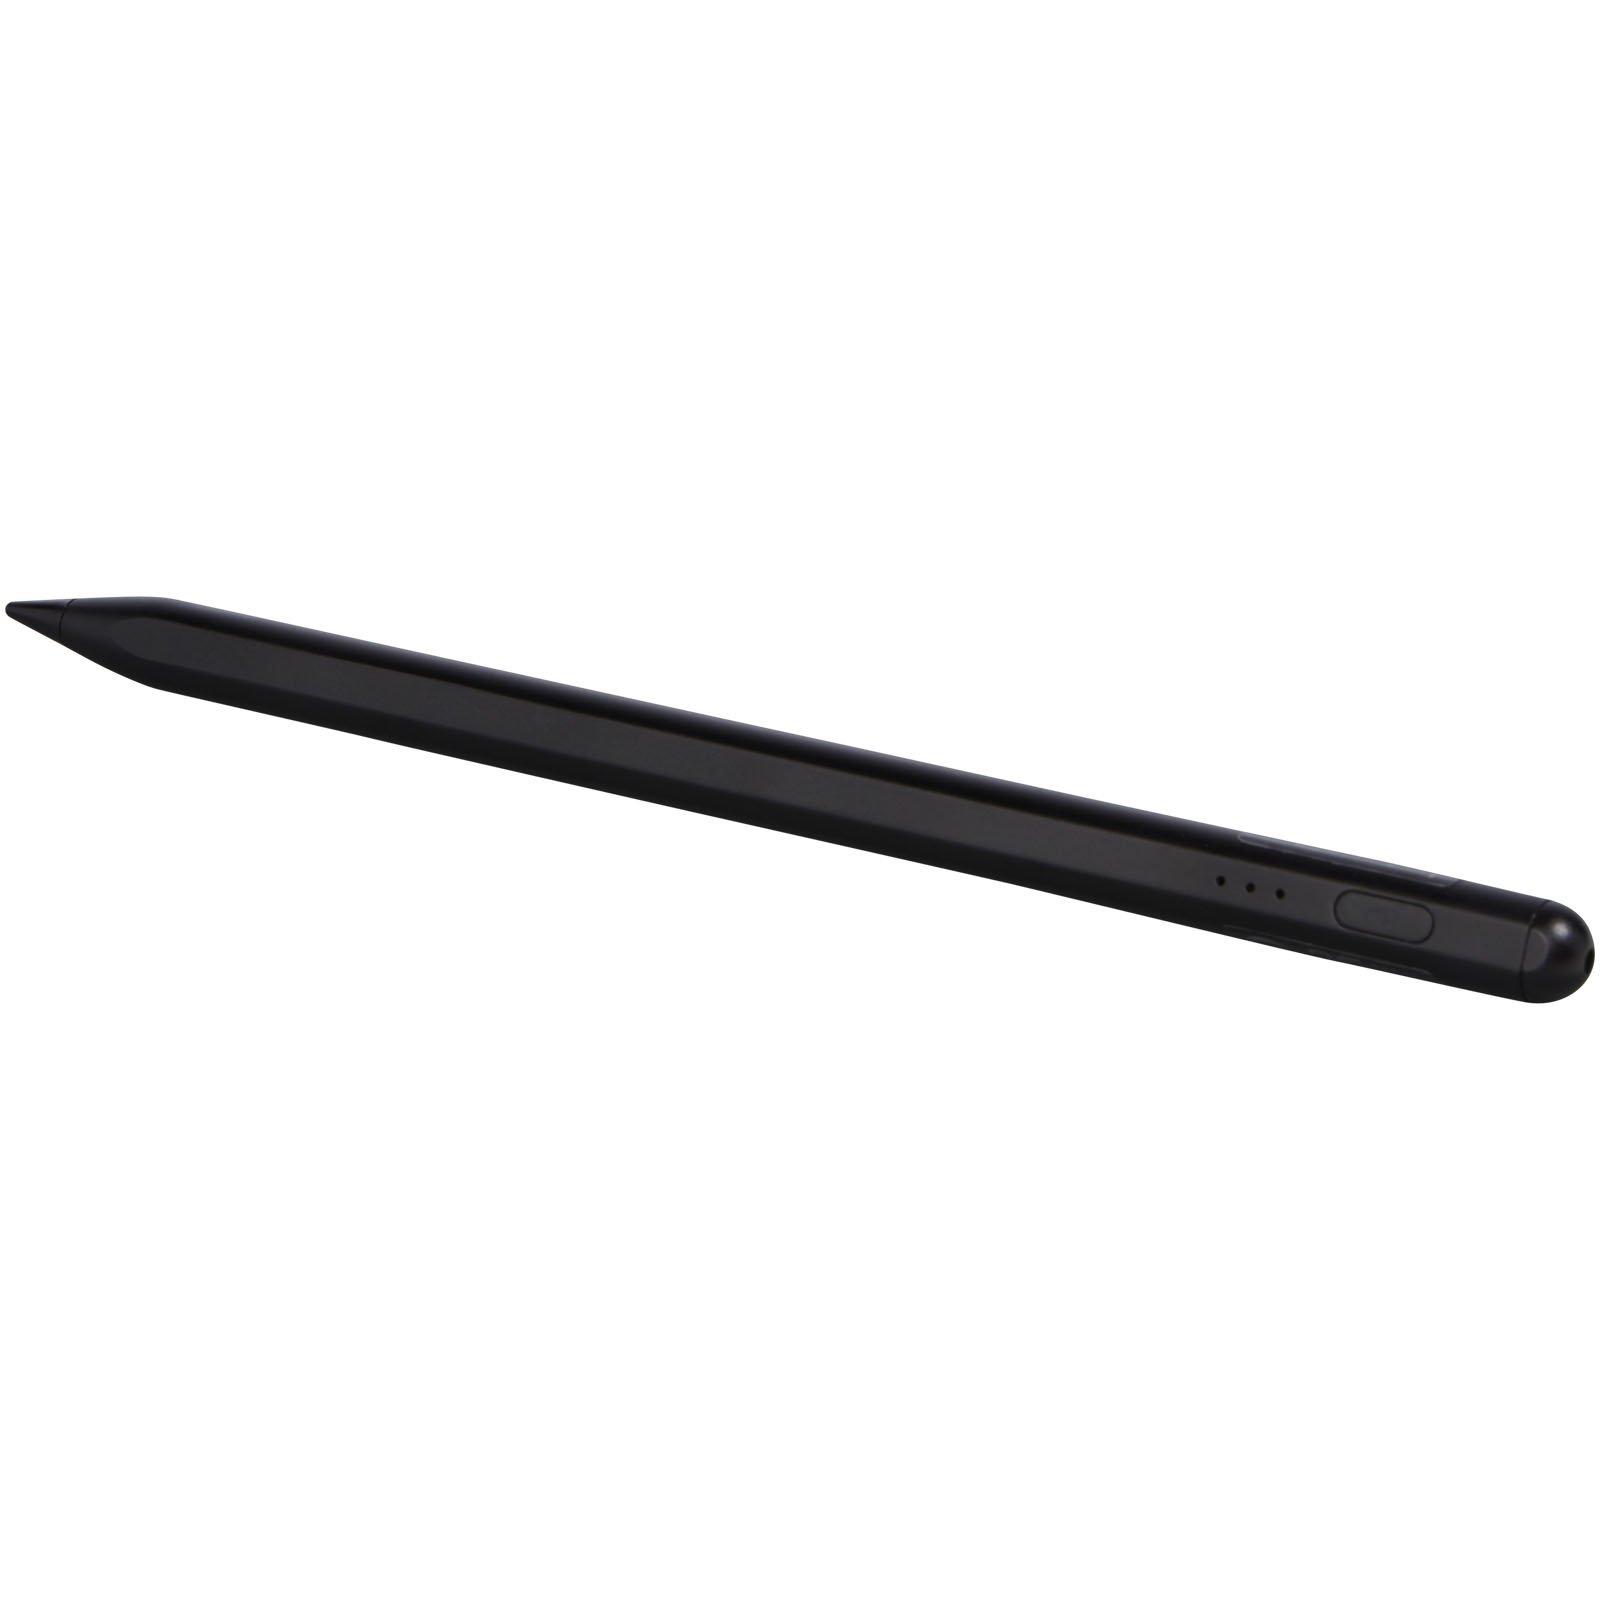 Advertising Telephone & Tablet Accessories - Hybrid Active stylus pen for iPad - 0